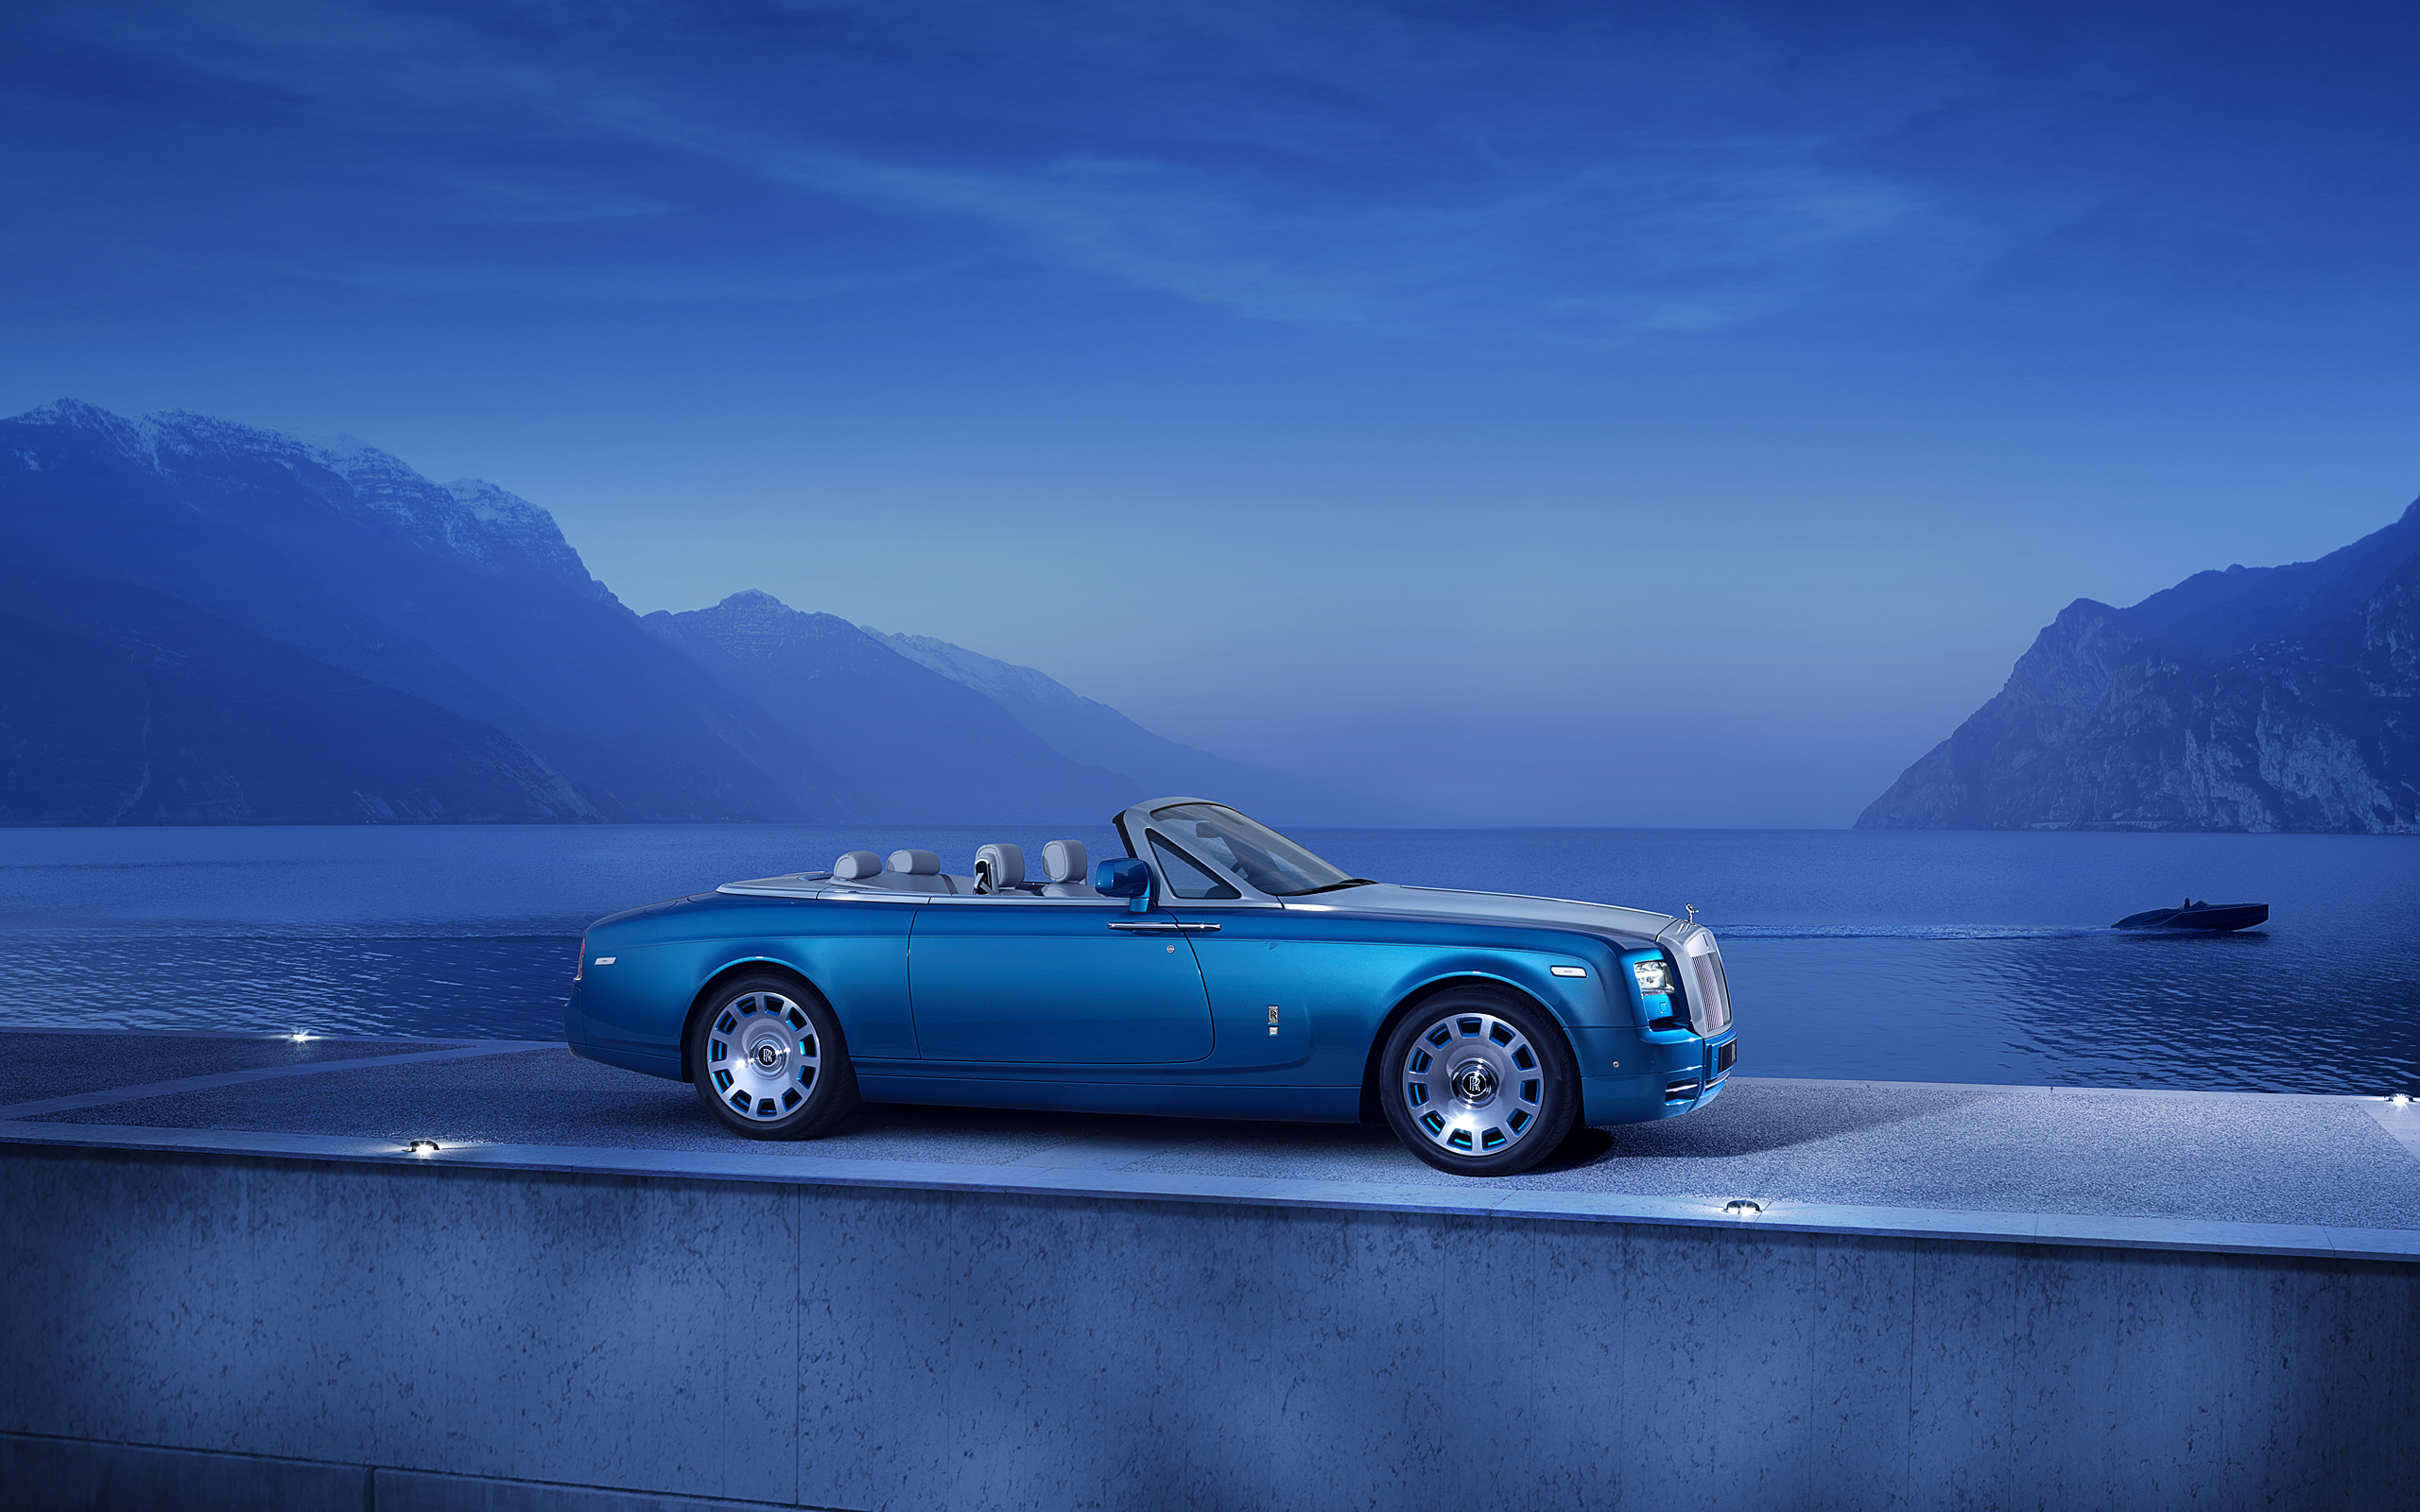  2014 Rolls-Royce Phantom Drophead Coupe Waterspeed Collection Wallpaper.